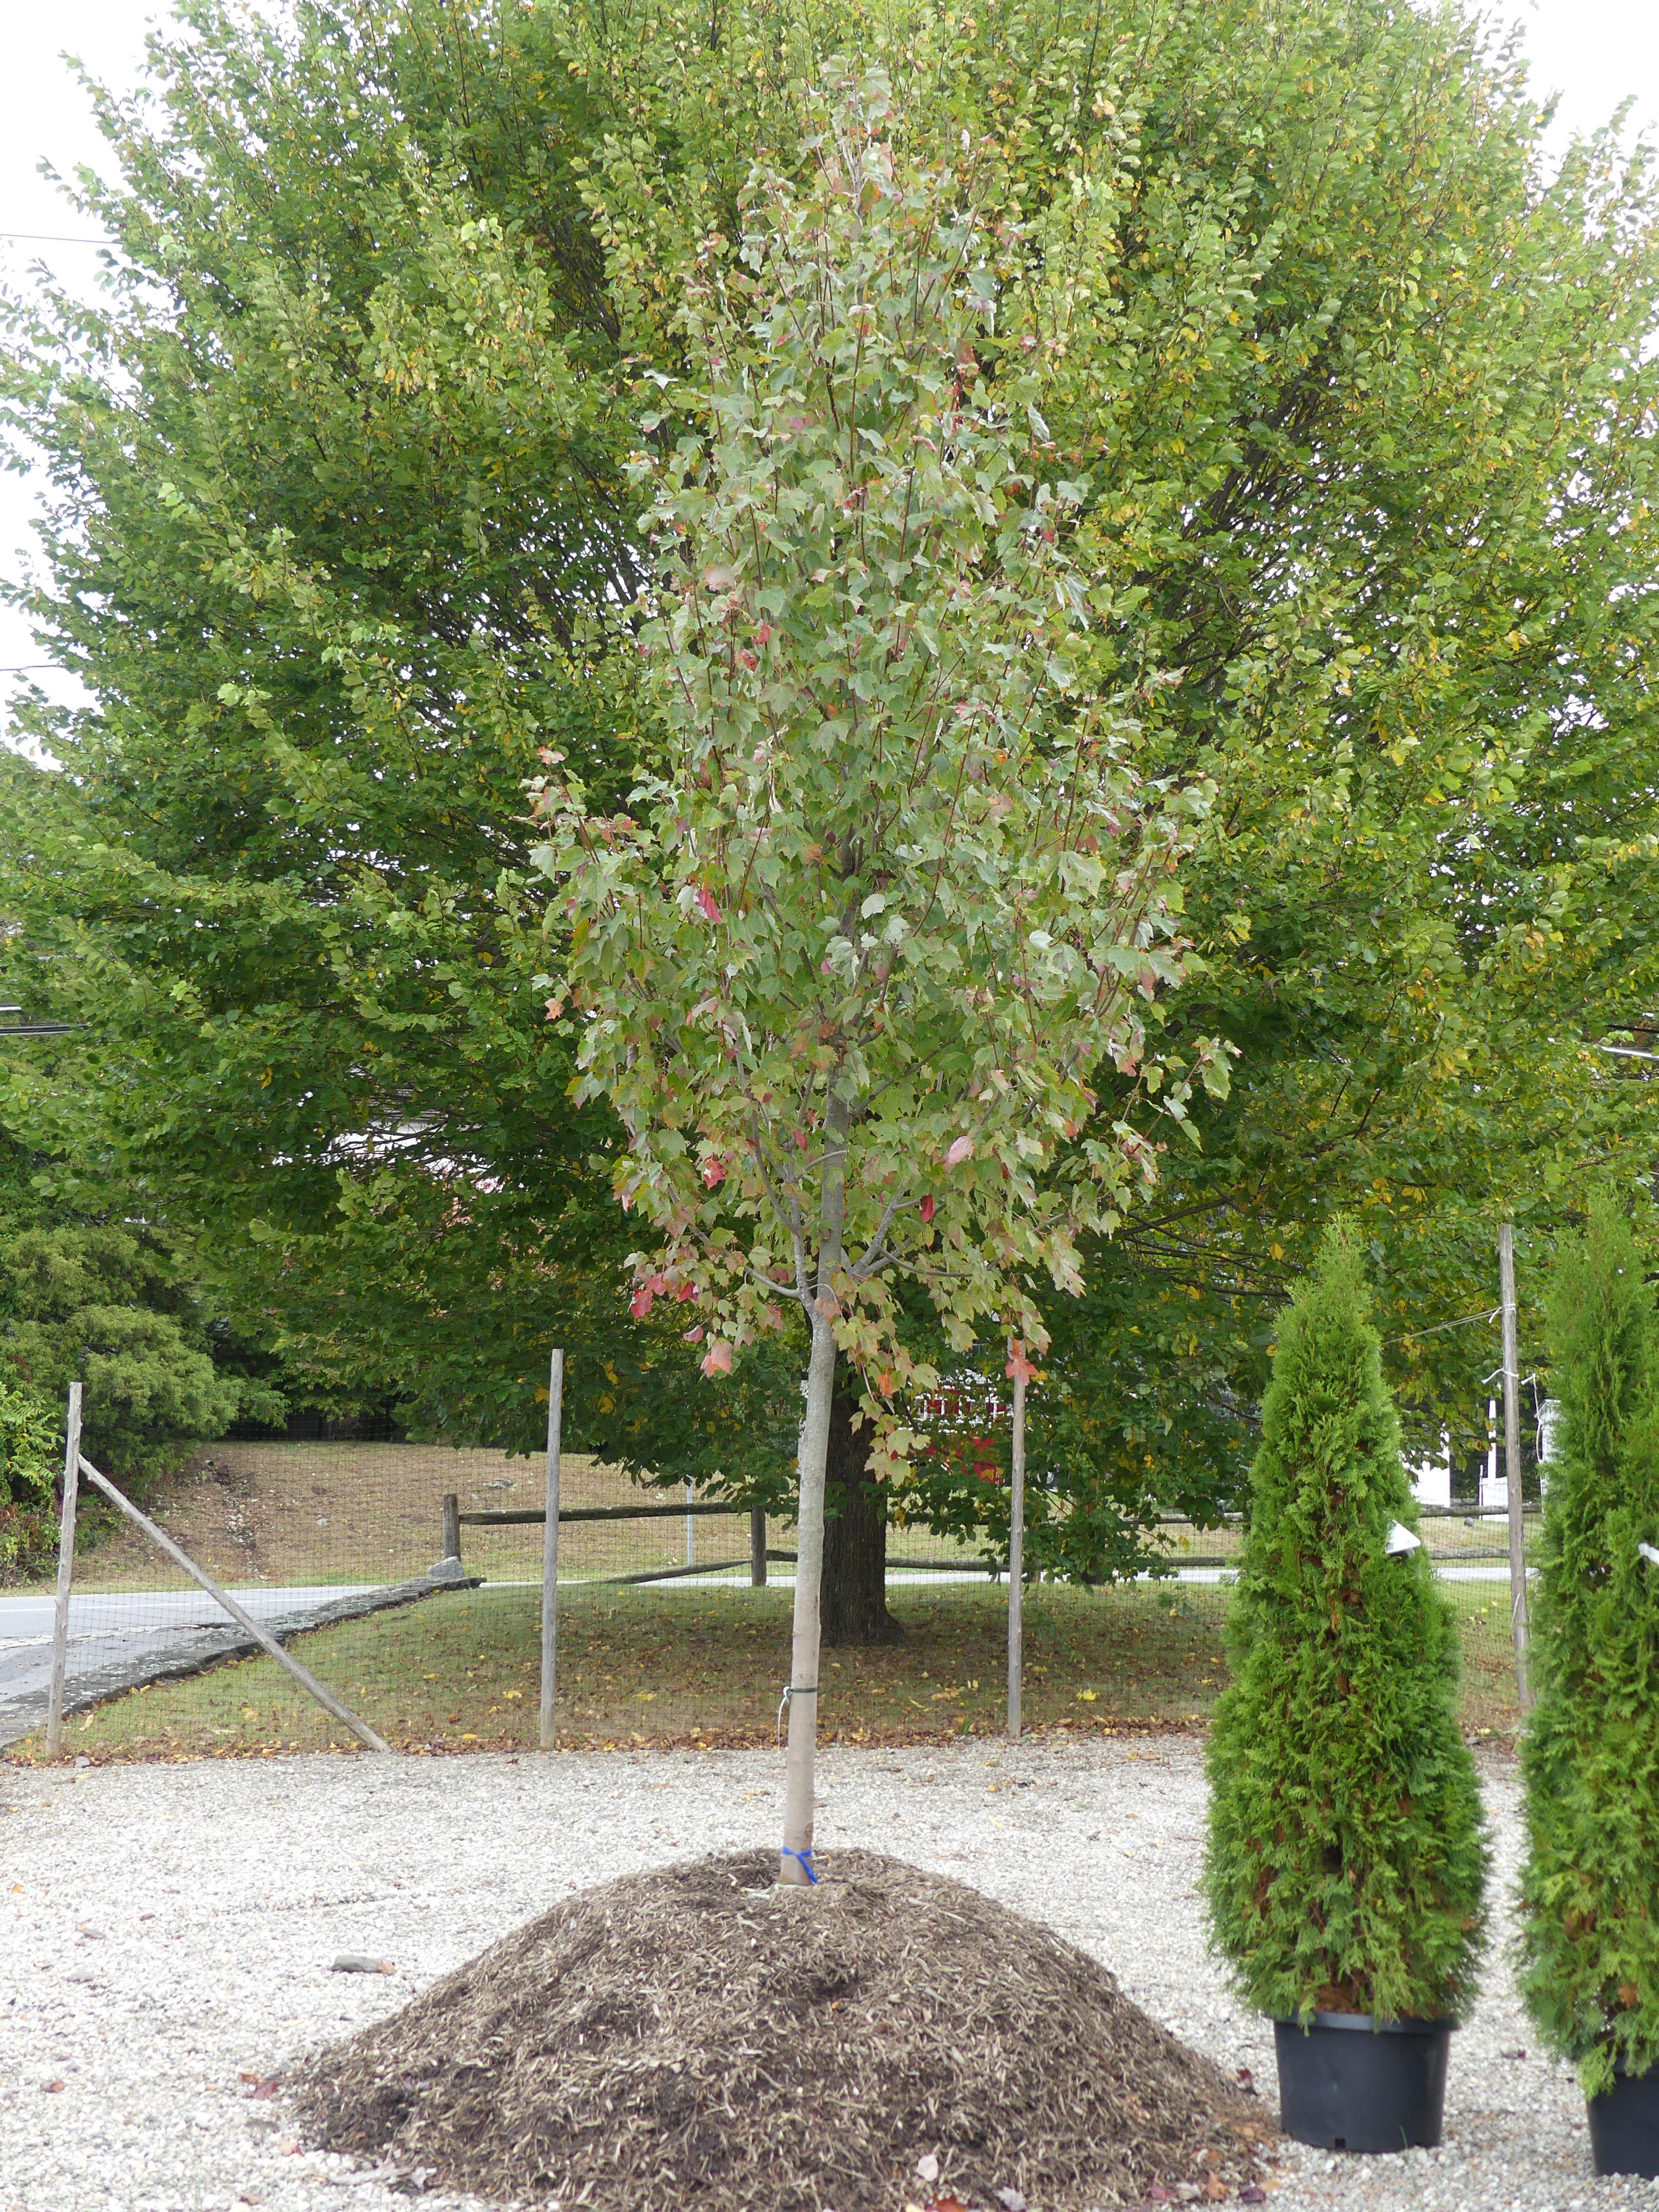 Remember that when buying an end-of-the-season tree you can bargain for an extra year of guarantee and even discounted planting. This maple could by yours for half the original $750 retail price. ANDREW MESSINGER